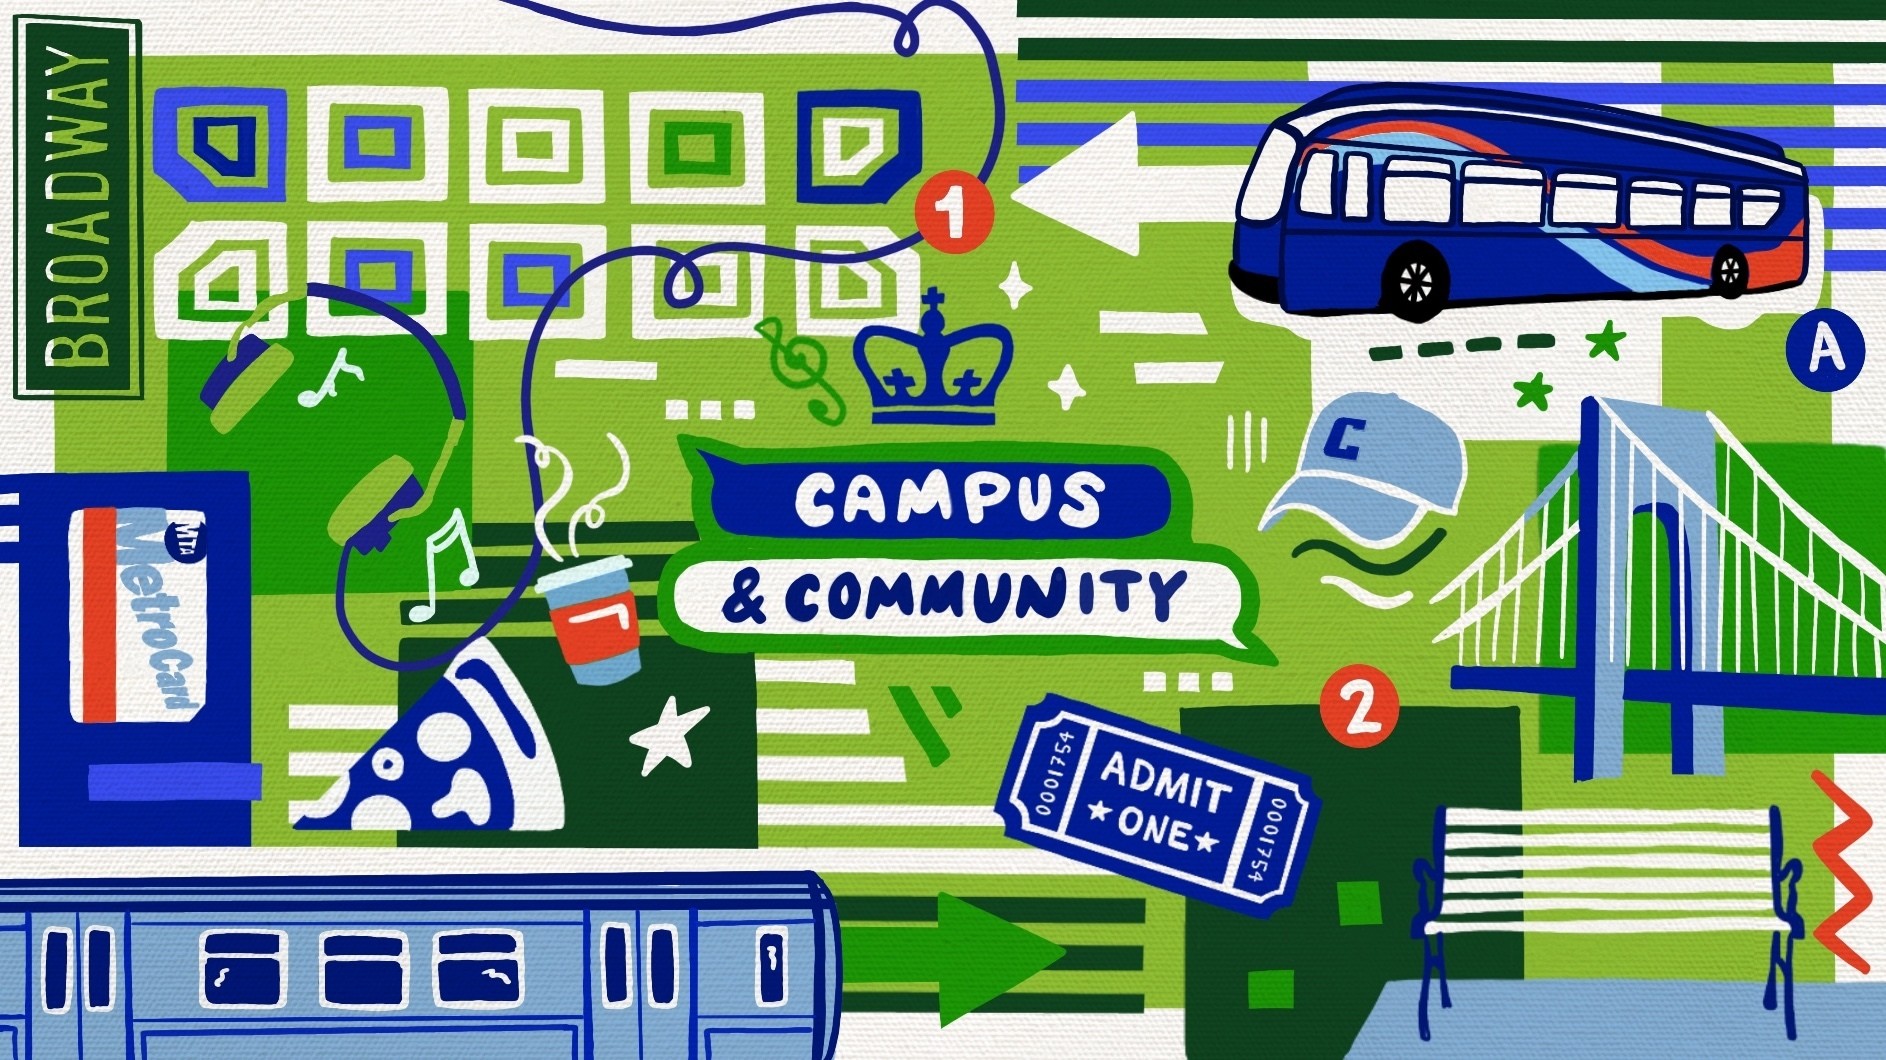 A blue and green graphic with the words "Campus & Community" in its center alongside icons that represent Columbia University and New York City.